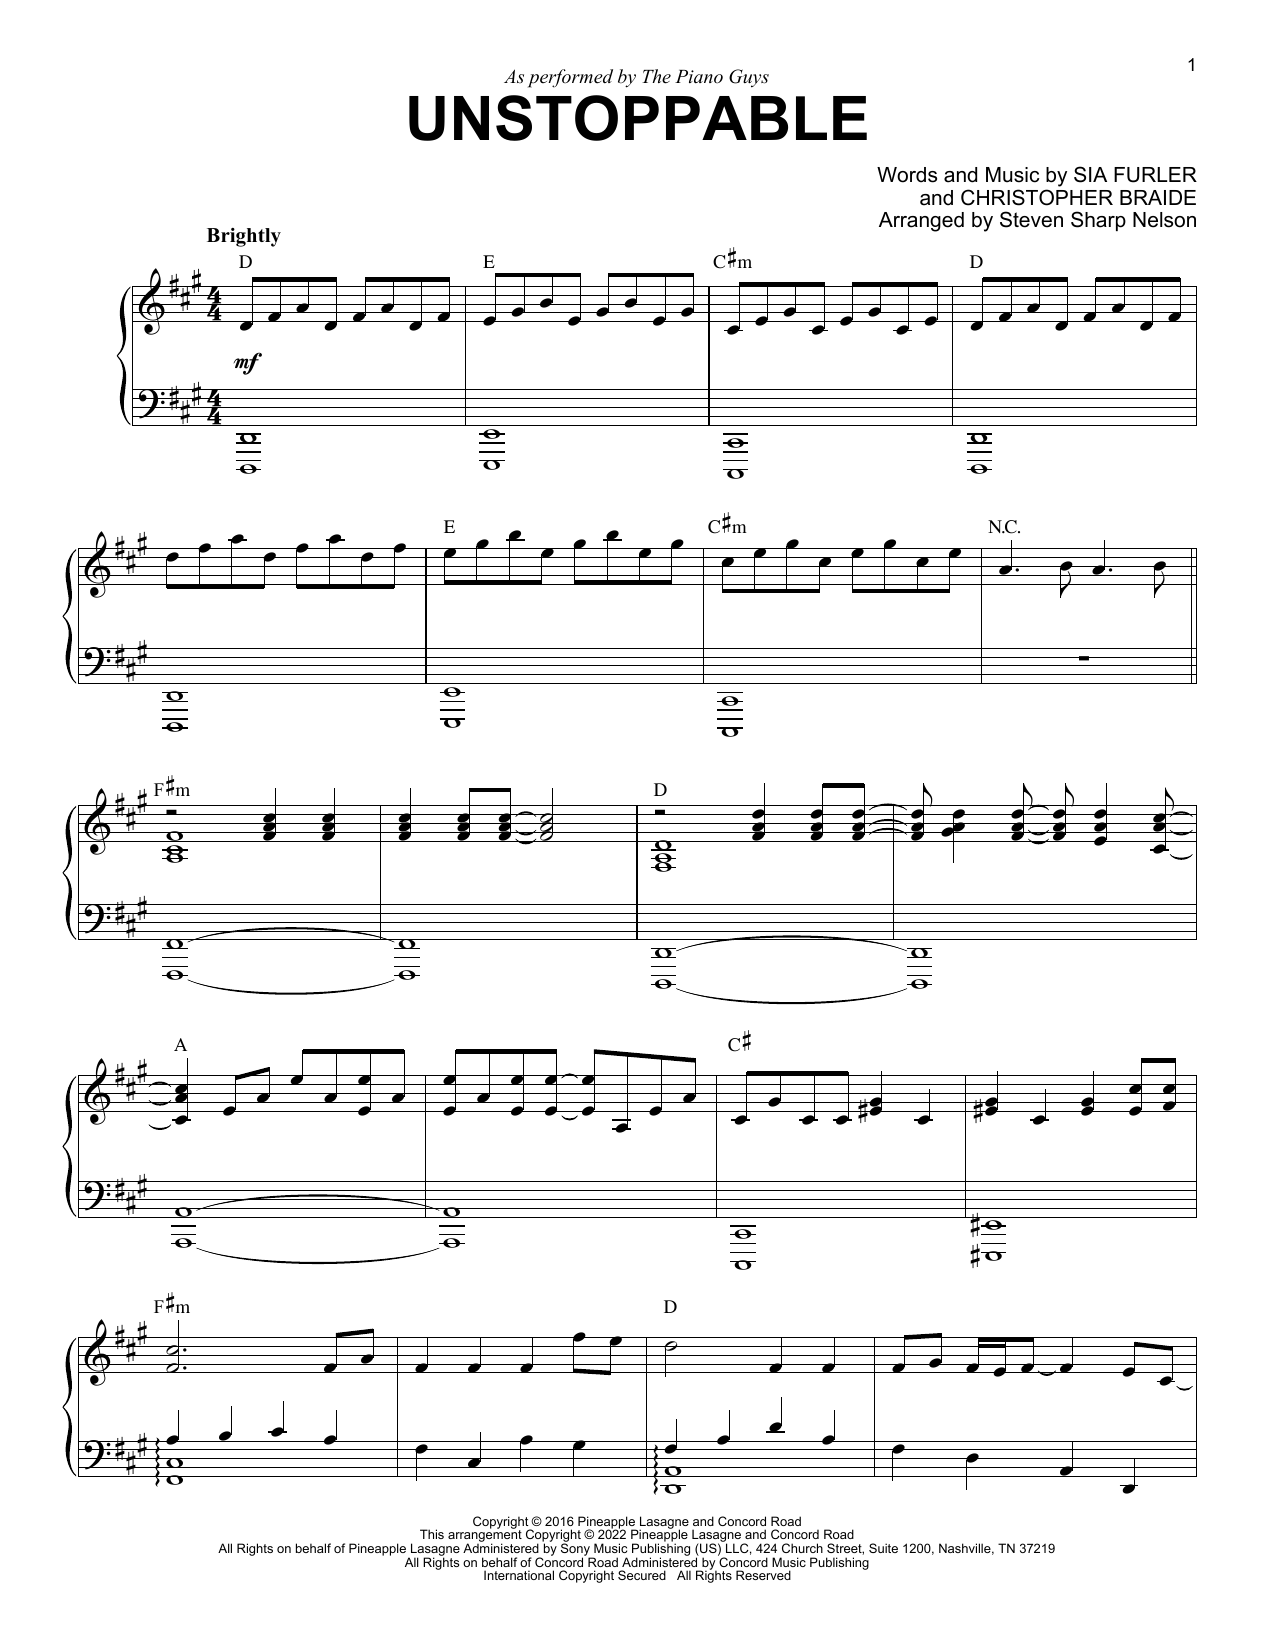 Download The Piano Guys Unstoppable Sheet Music